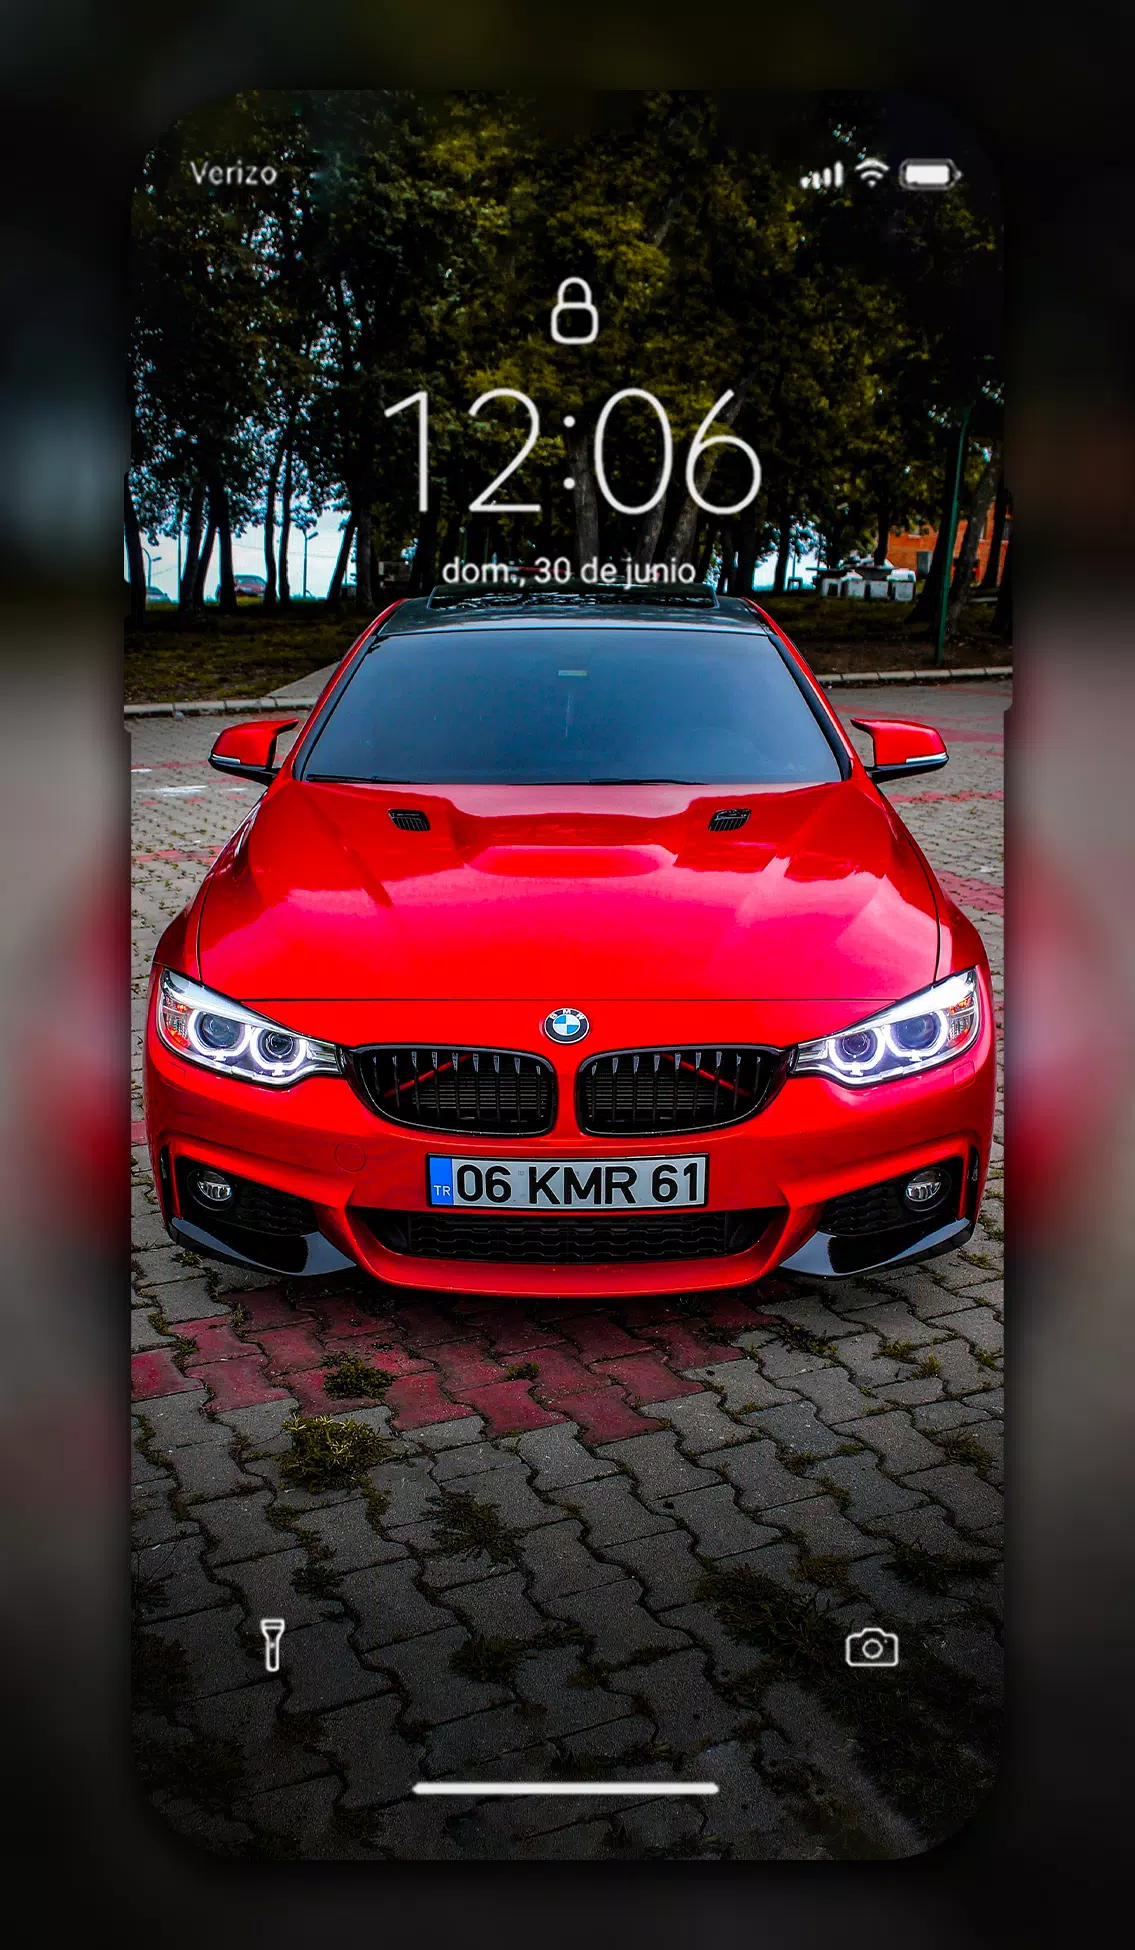 Exclusive: BMW wallpapers